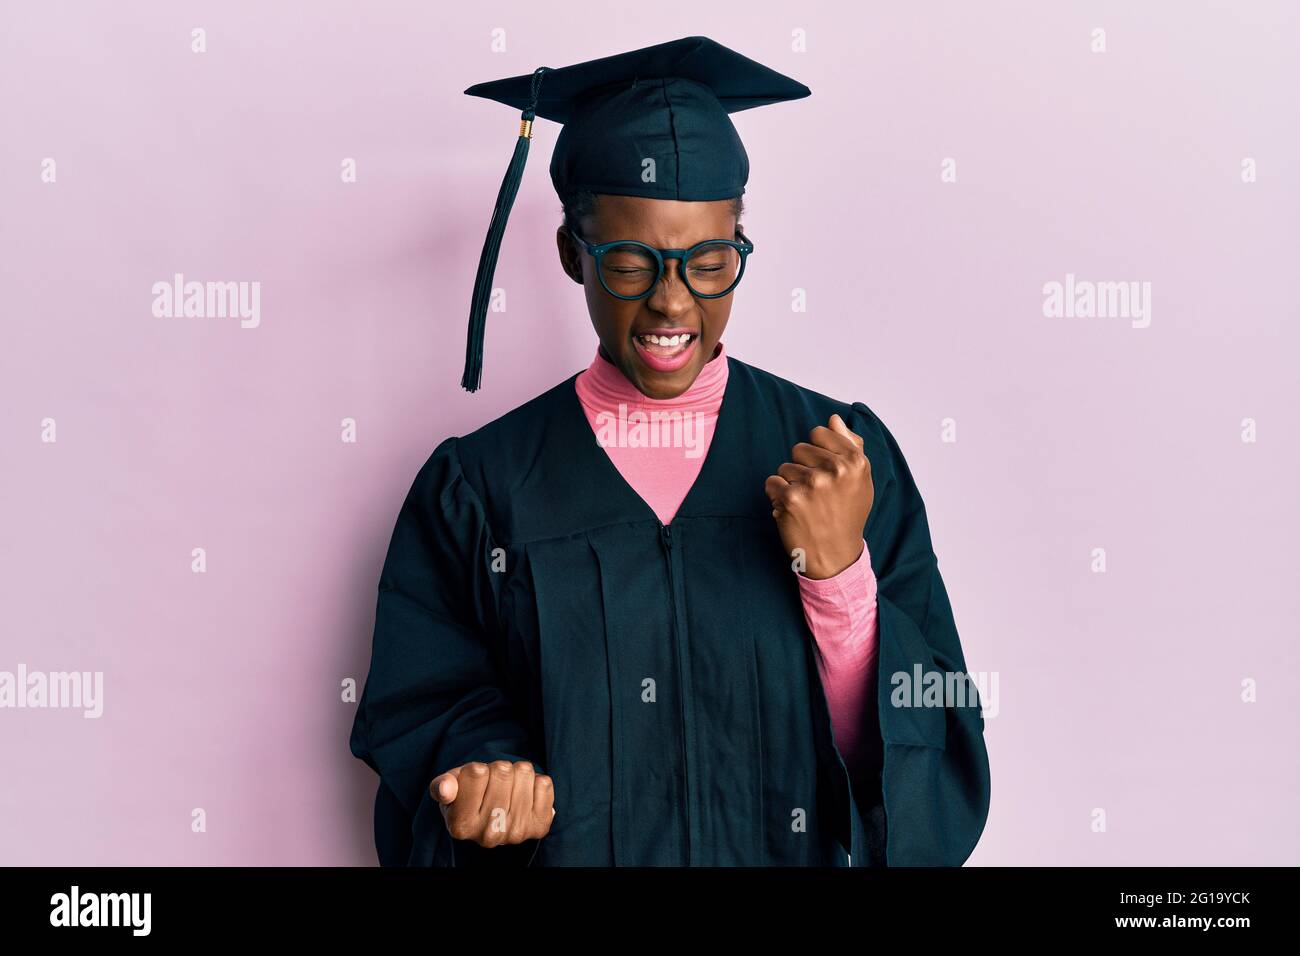 Young african american girl wearing graduation cap and ceremony robe celebrating surprised and amazed for success with arms raised and eyes closed. wi Stock Photo